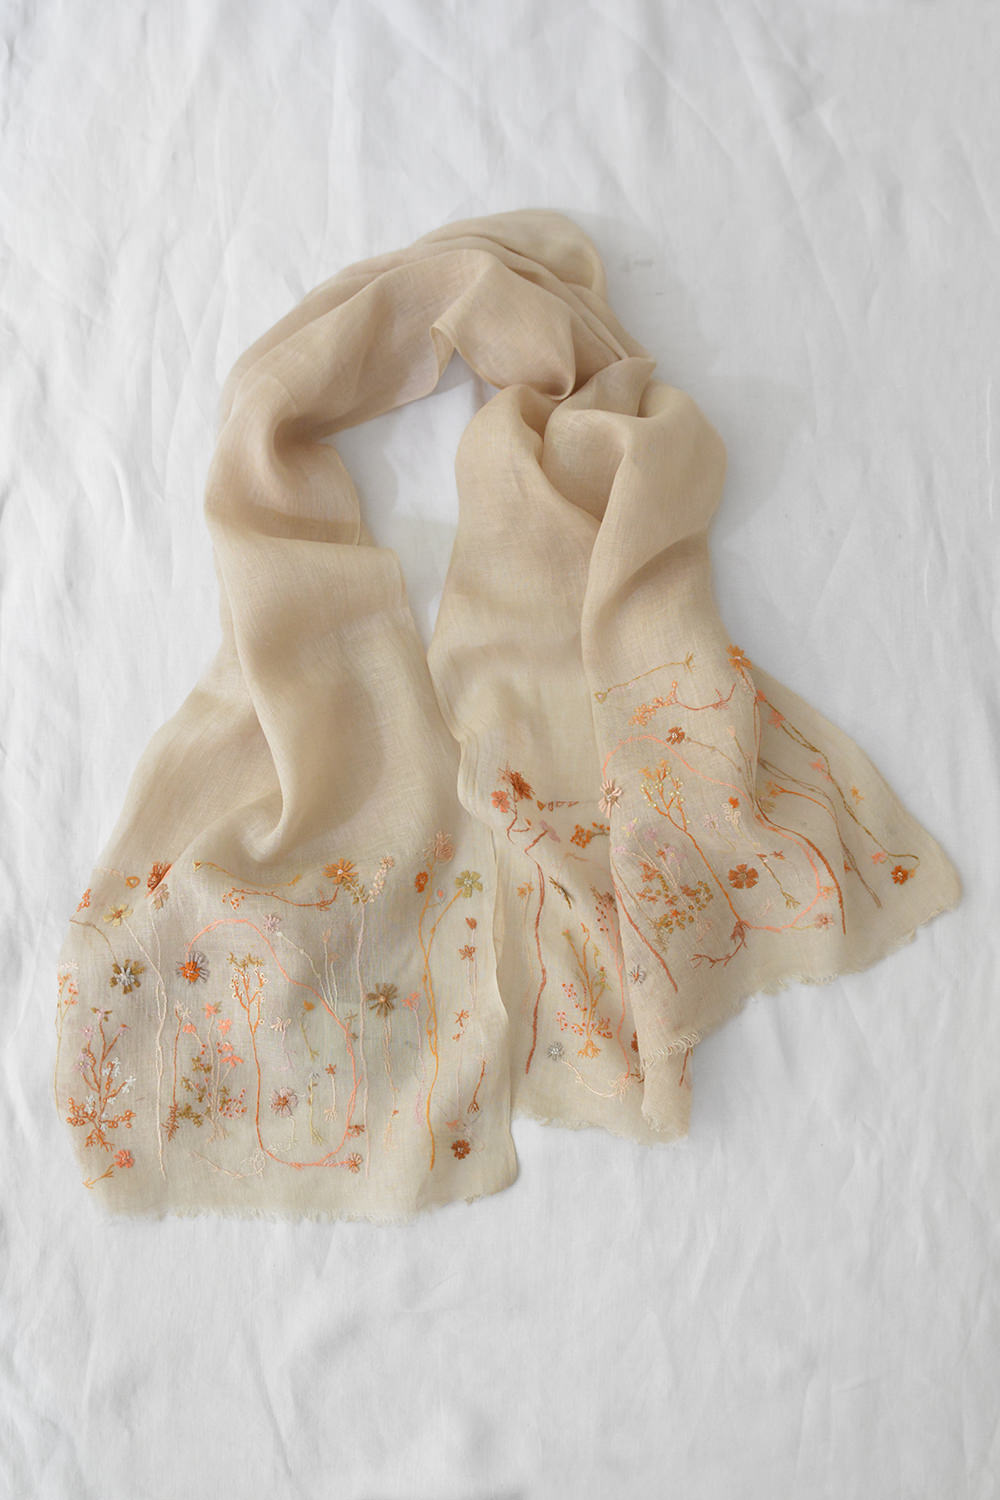 Sophie Digard Linen Stole - Cord Wildflower. Makie main.